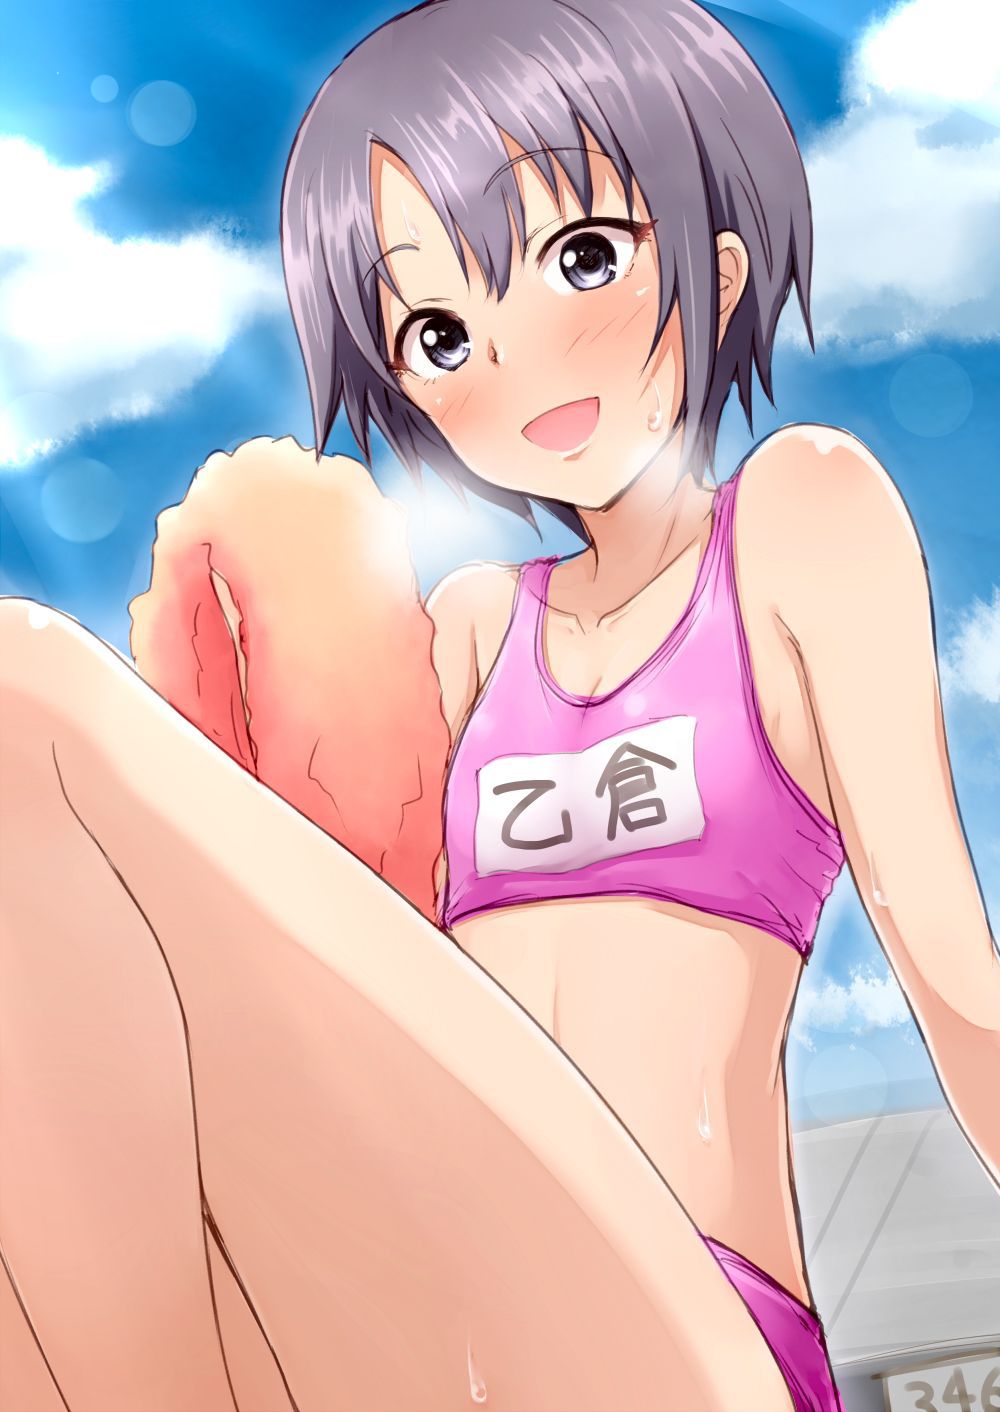 [Lolicon test] do not react to non-erotic images of Loli girl nothing erotic or lolicon test! 23